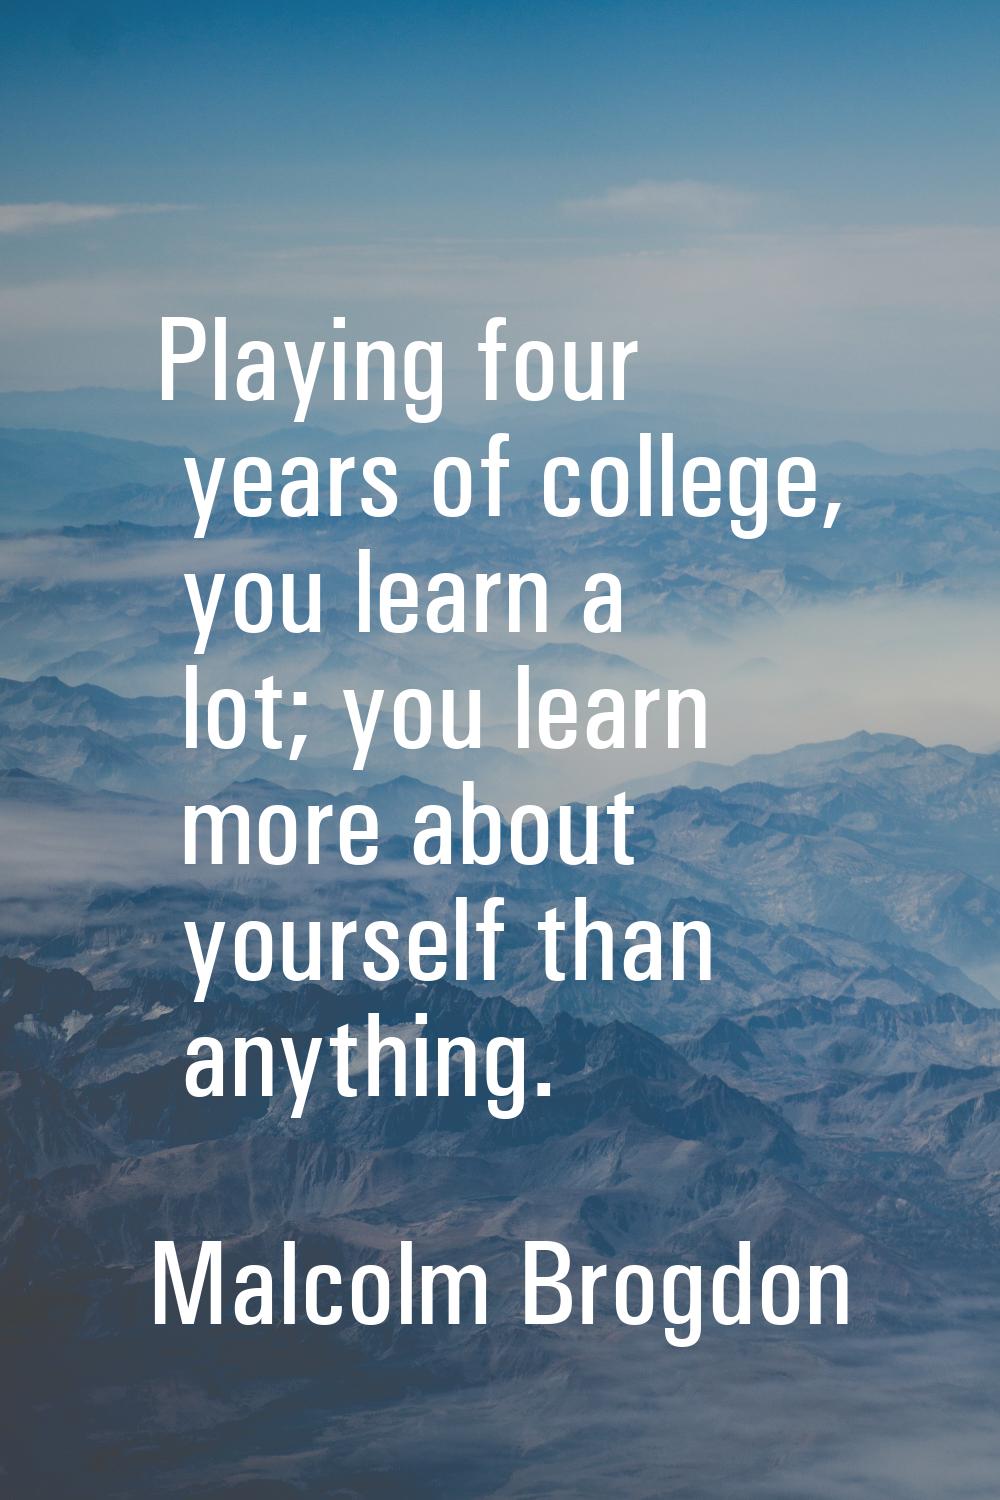 Playing four years of college, you learn a lot; you learn more about yourself than anything.